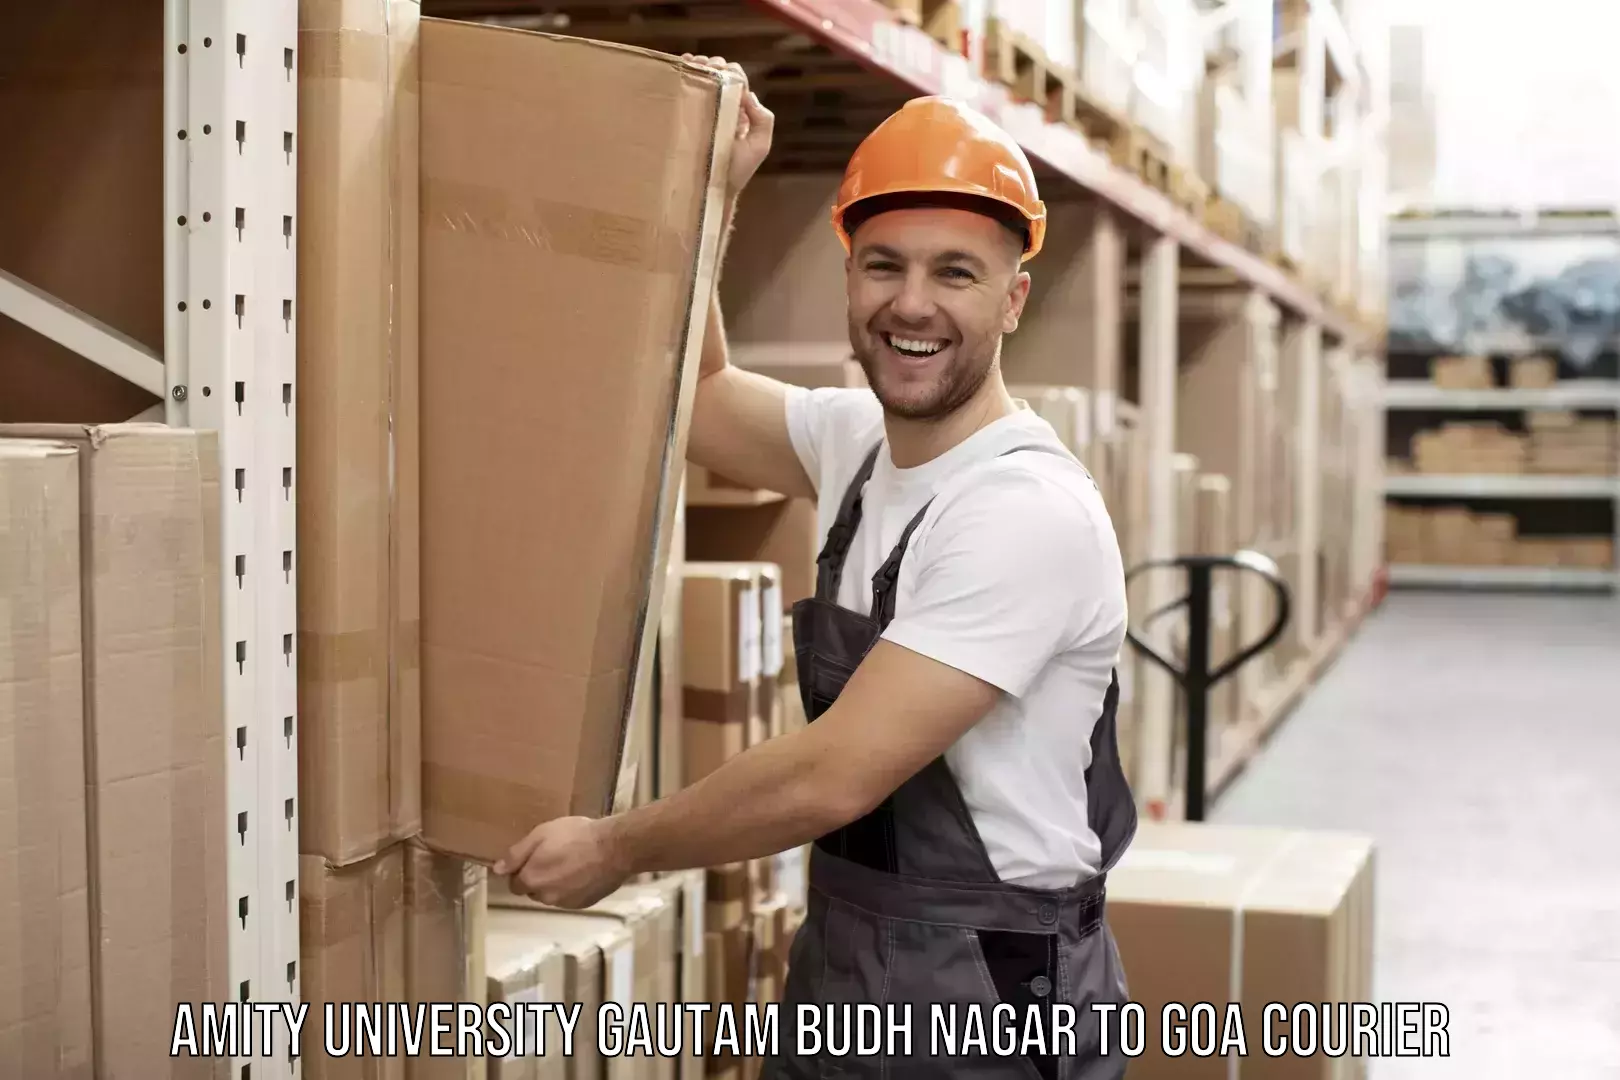 Packing and moving services in Amity University Gautam Budh Nagar to IIT Goa